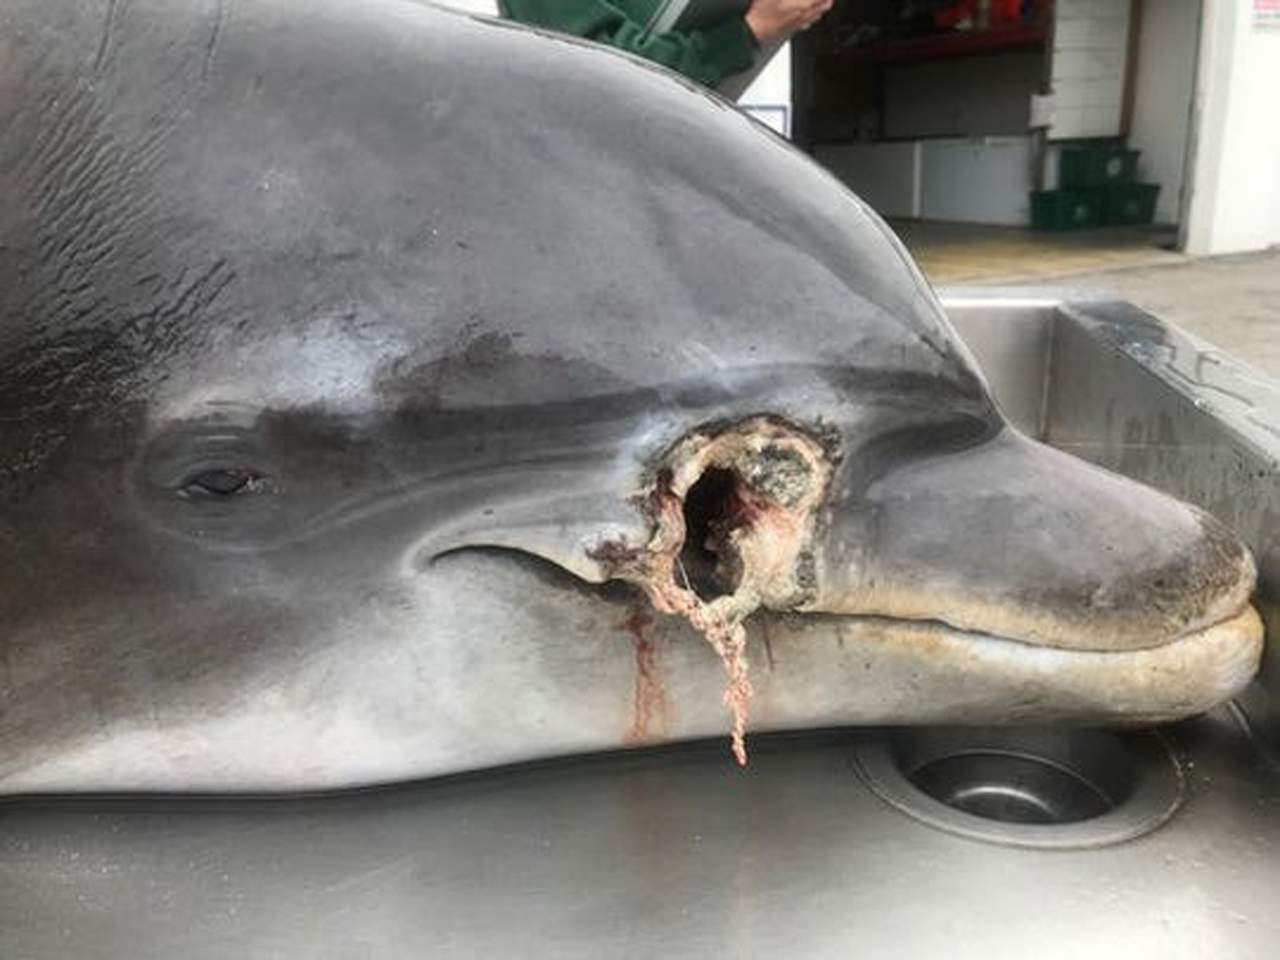 2 dead dolphins found with bullet wounds in Florida